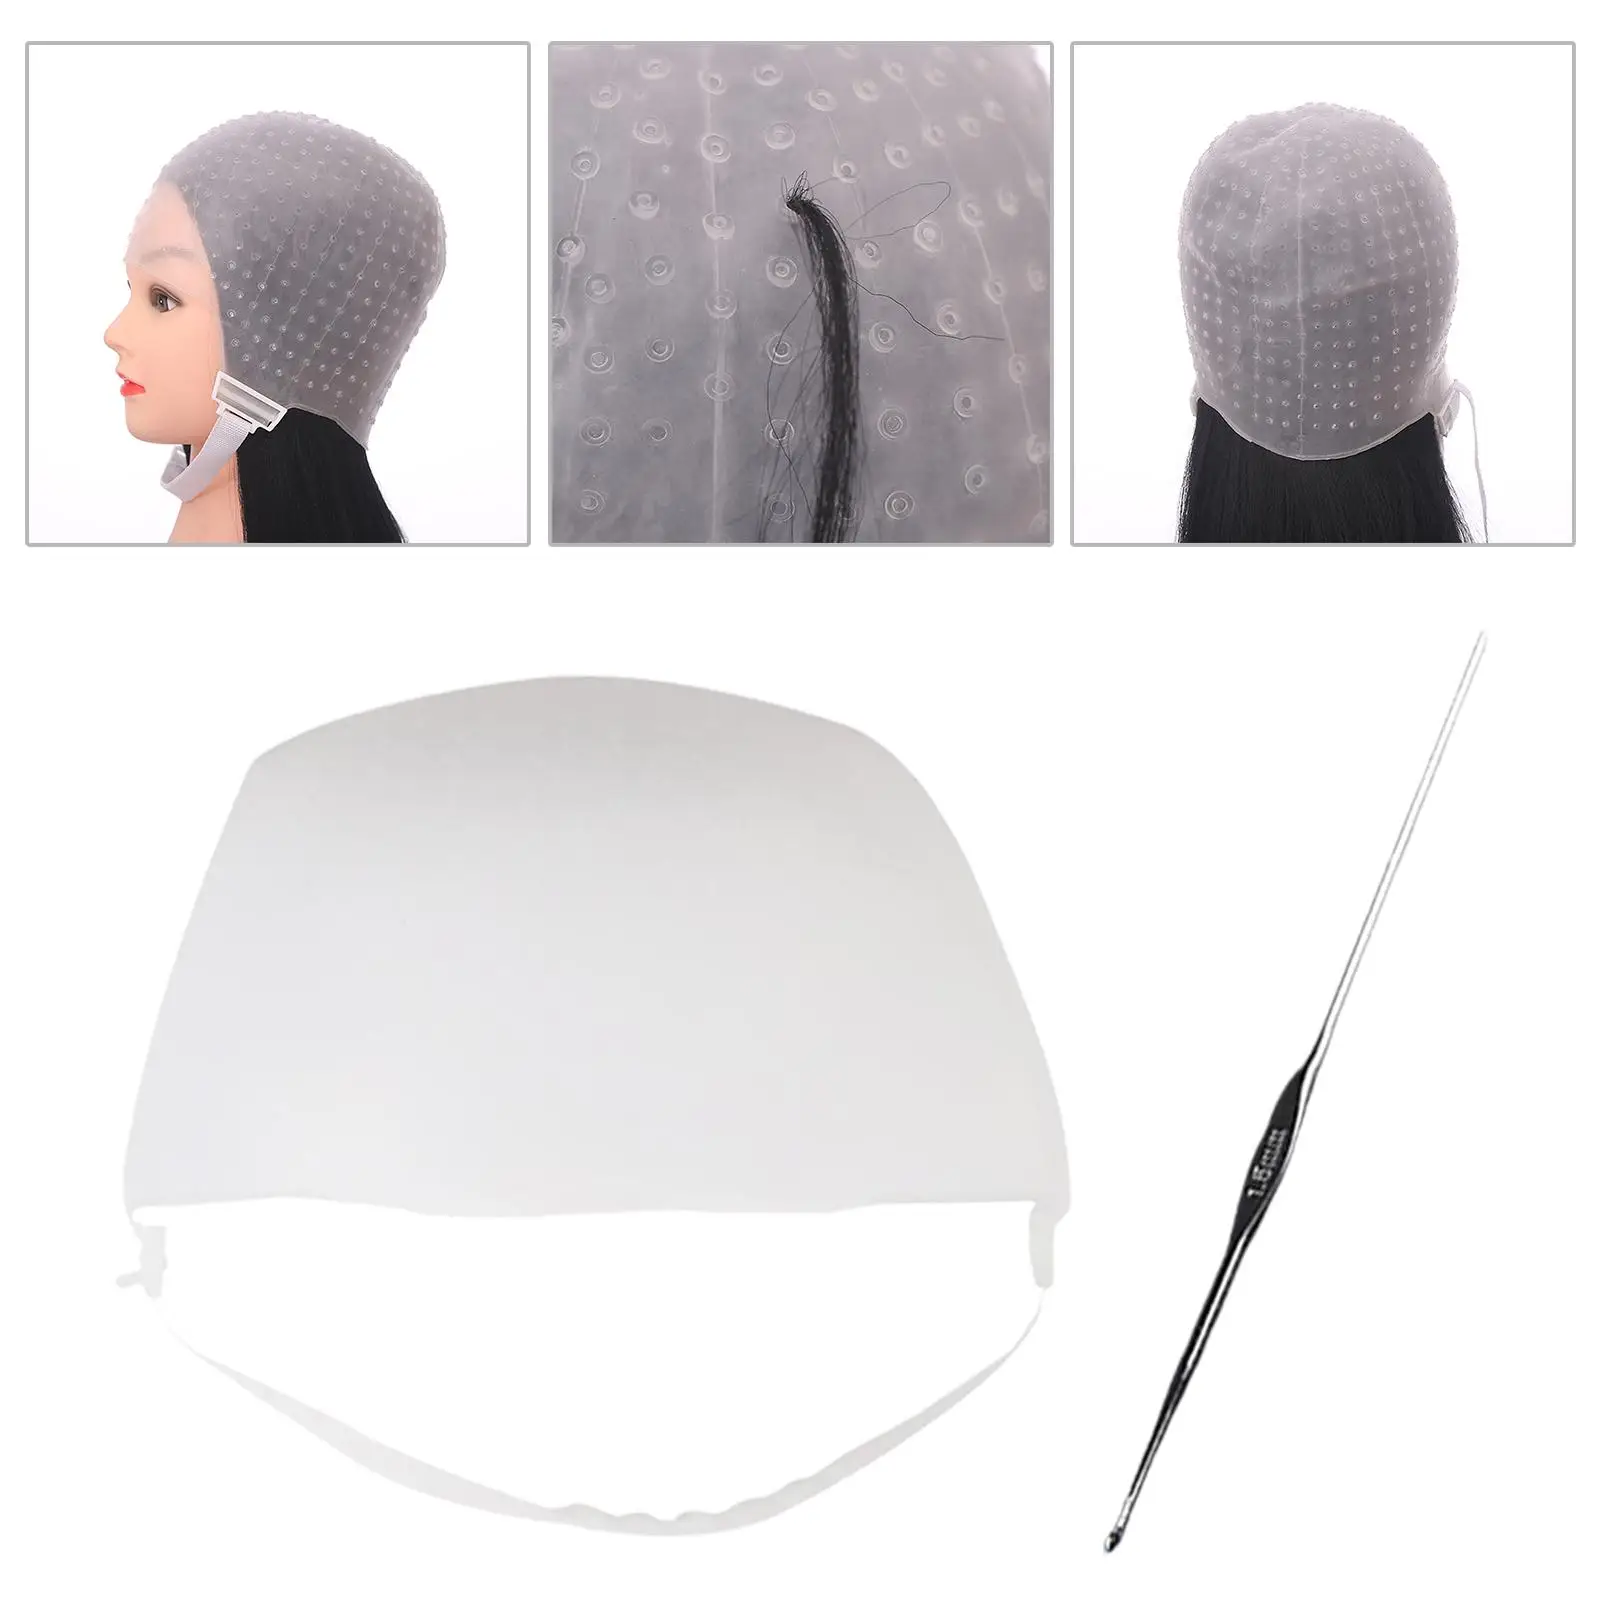 Silicone Hair Coloring Highlighting Hat with Needle White Binding Band Hair Dye Hat for Barber Salon Hair Styling Tools Women